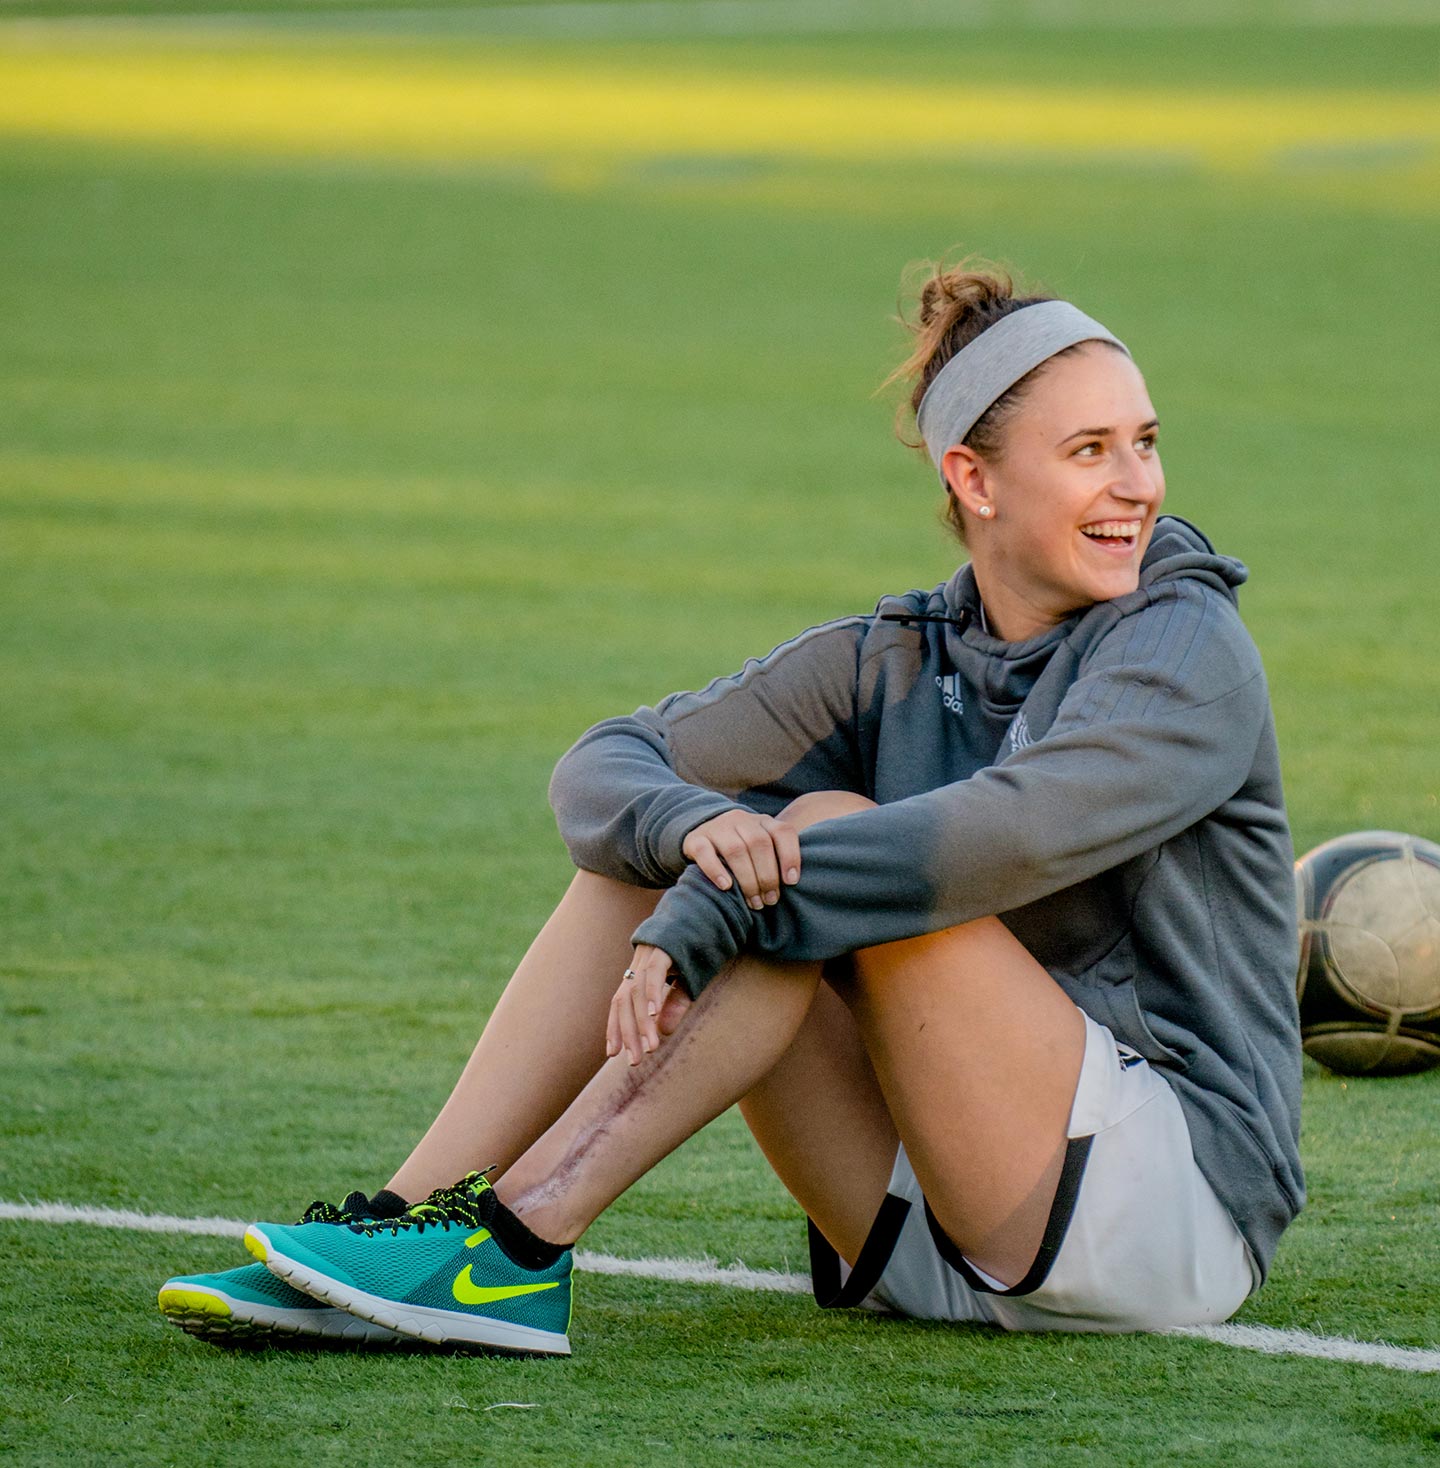 Kim Mignone sitting on soccer field, smiling. Scar on her leg is visible.